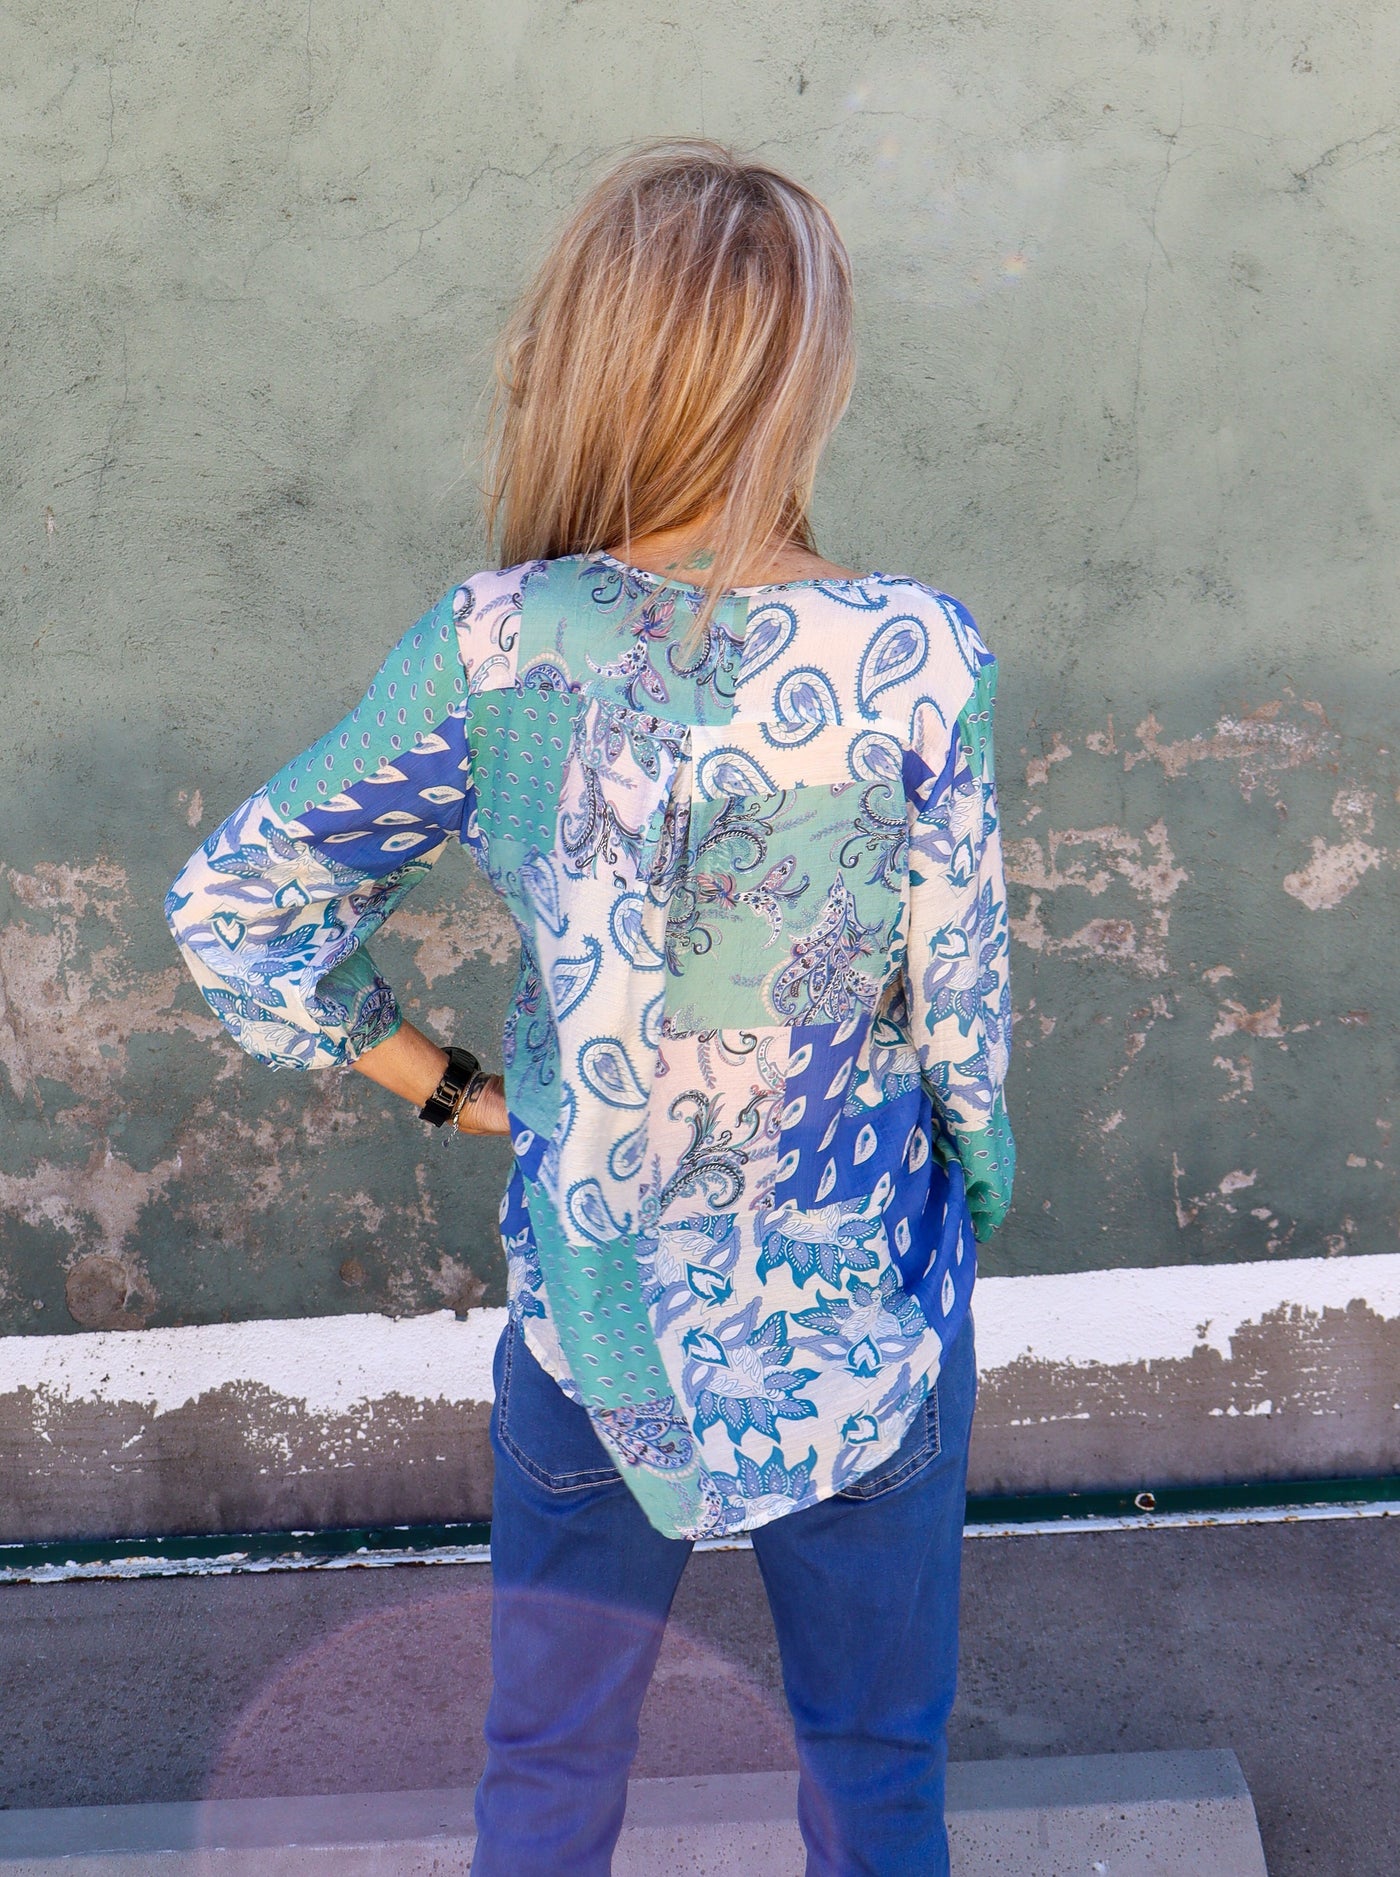 Model is wearing a blue and white paisley printed blouse, paired with blue jeans.